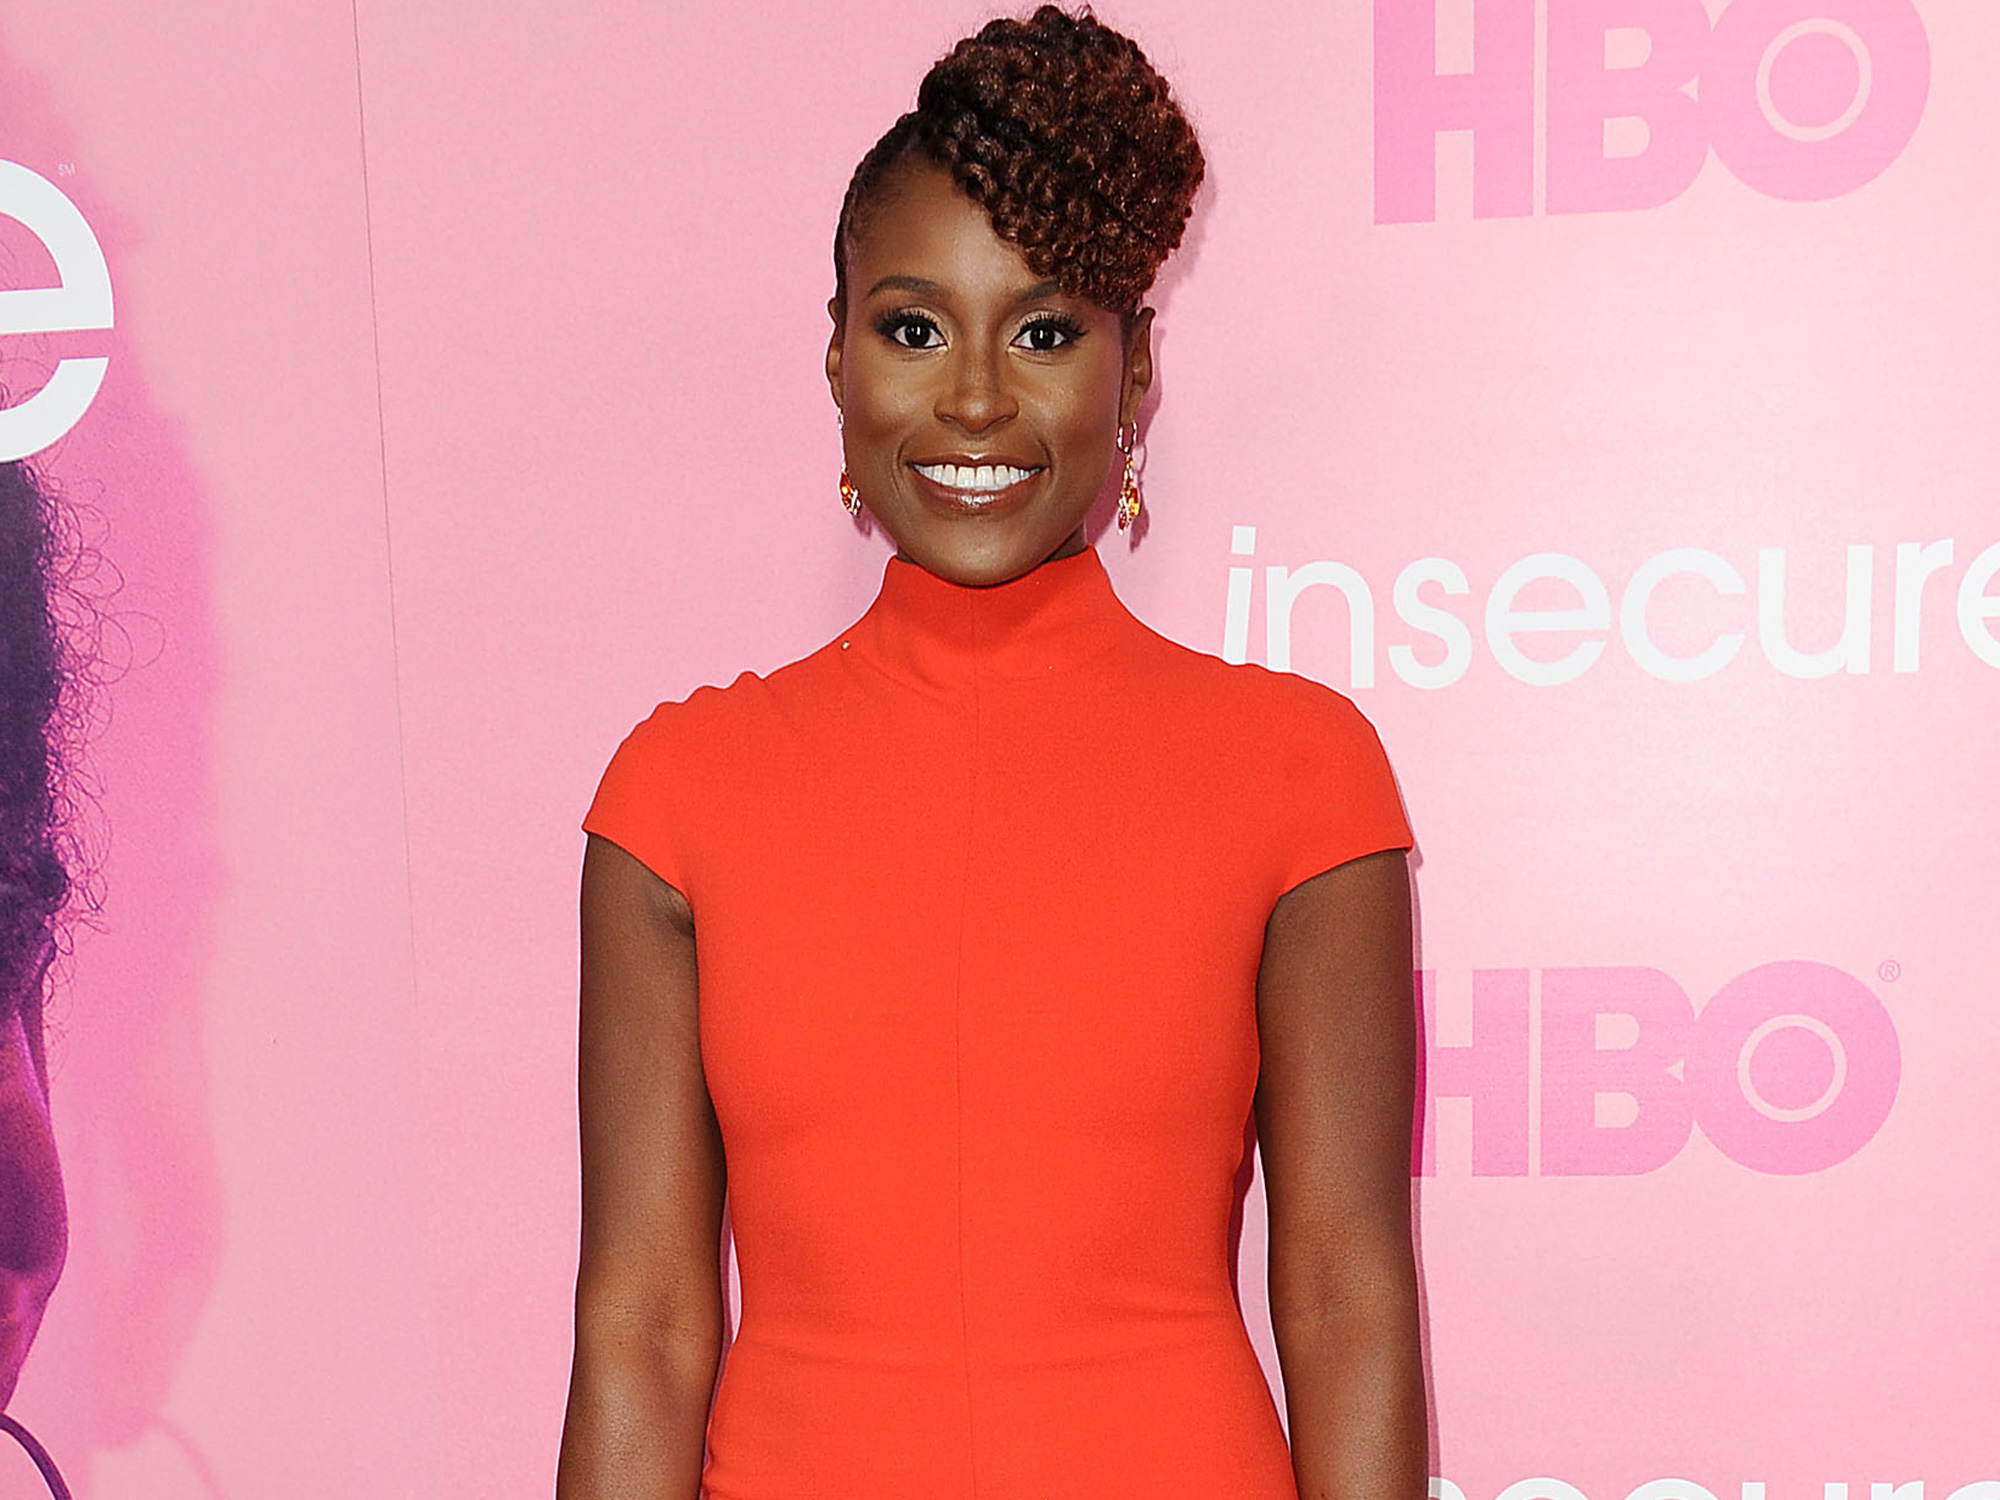 Issa Rae Joins Universal Pictures’ Comedy Movie ‘Little’ Alongside Marsai Martin